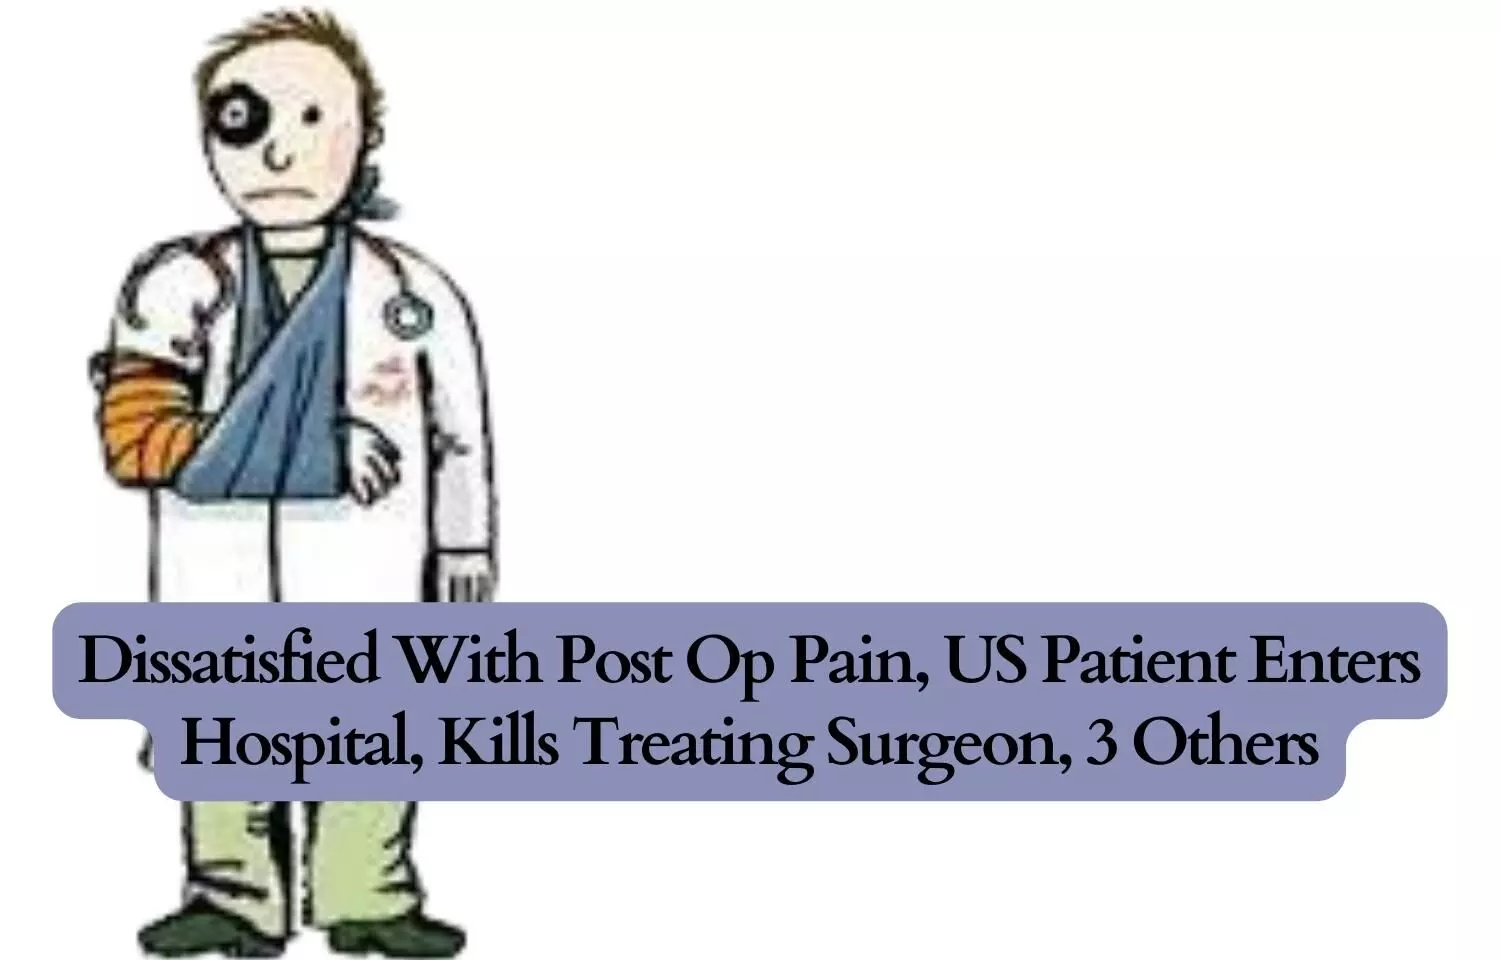 Dissatisfied with post operation pain, US patient enters hospital, kills treating surgeon, 3 others